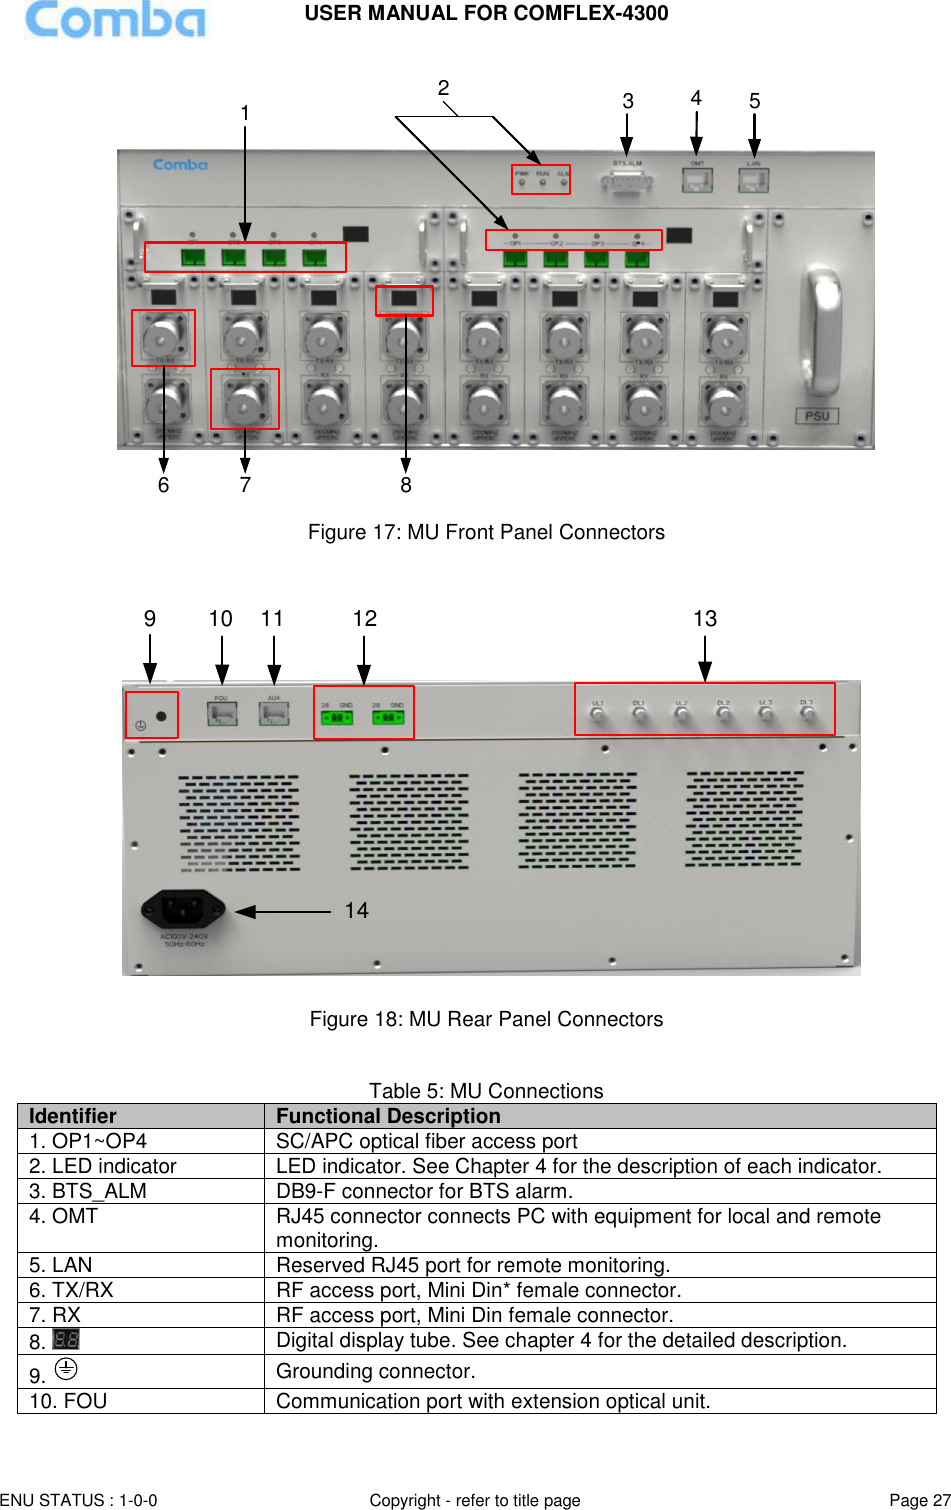 USER MANUAL FOR COMFLEX-4300 ENU STATUS : 1-0-0 Copyright - refer to title page Page 27  123456 7 8  Figure 17: MU Front Panel Connectors   9 10 11 12 1314  Figure 18: MU Rear Panel Connectors   Table 5: MU Connections Identifier Functional Description 1. OP1~OP4 SC/APC optical fiber access port 2. LED indicator LED indicator. See Chapter 4 for the description of each indicator.  3. BTS_ALM DB9-F connector for BTS alarm. 4. OMT RJ45 connector connects PC with equipment for local and remote monitoring. 5. LAN Reserved RJ45 port for remote monitoring. 6. TX/RX RF access port, Mini Din* female connector. 7. RX RF access port, Mini Din female connector. 8.   Digital display tube. See chapter 4 for the detailed description. 9.   Grounding connector. 10. FOU Communication port with extension optical unit. 